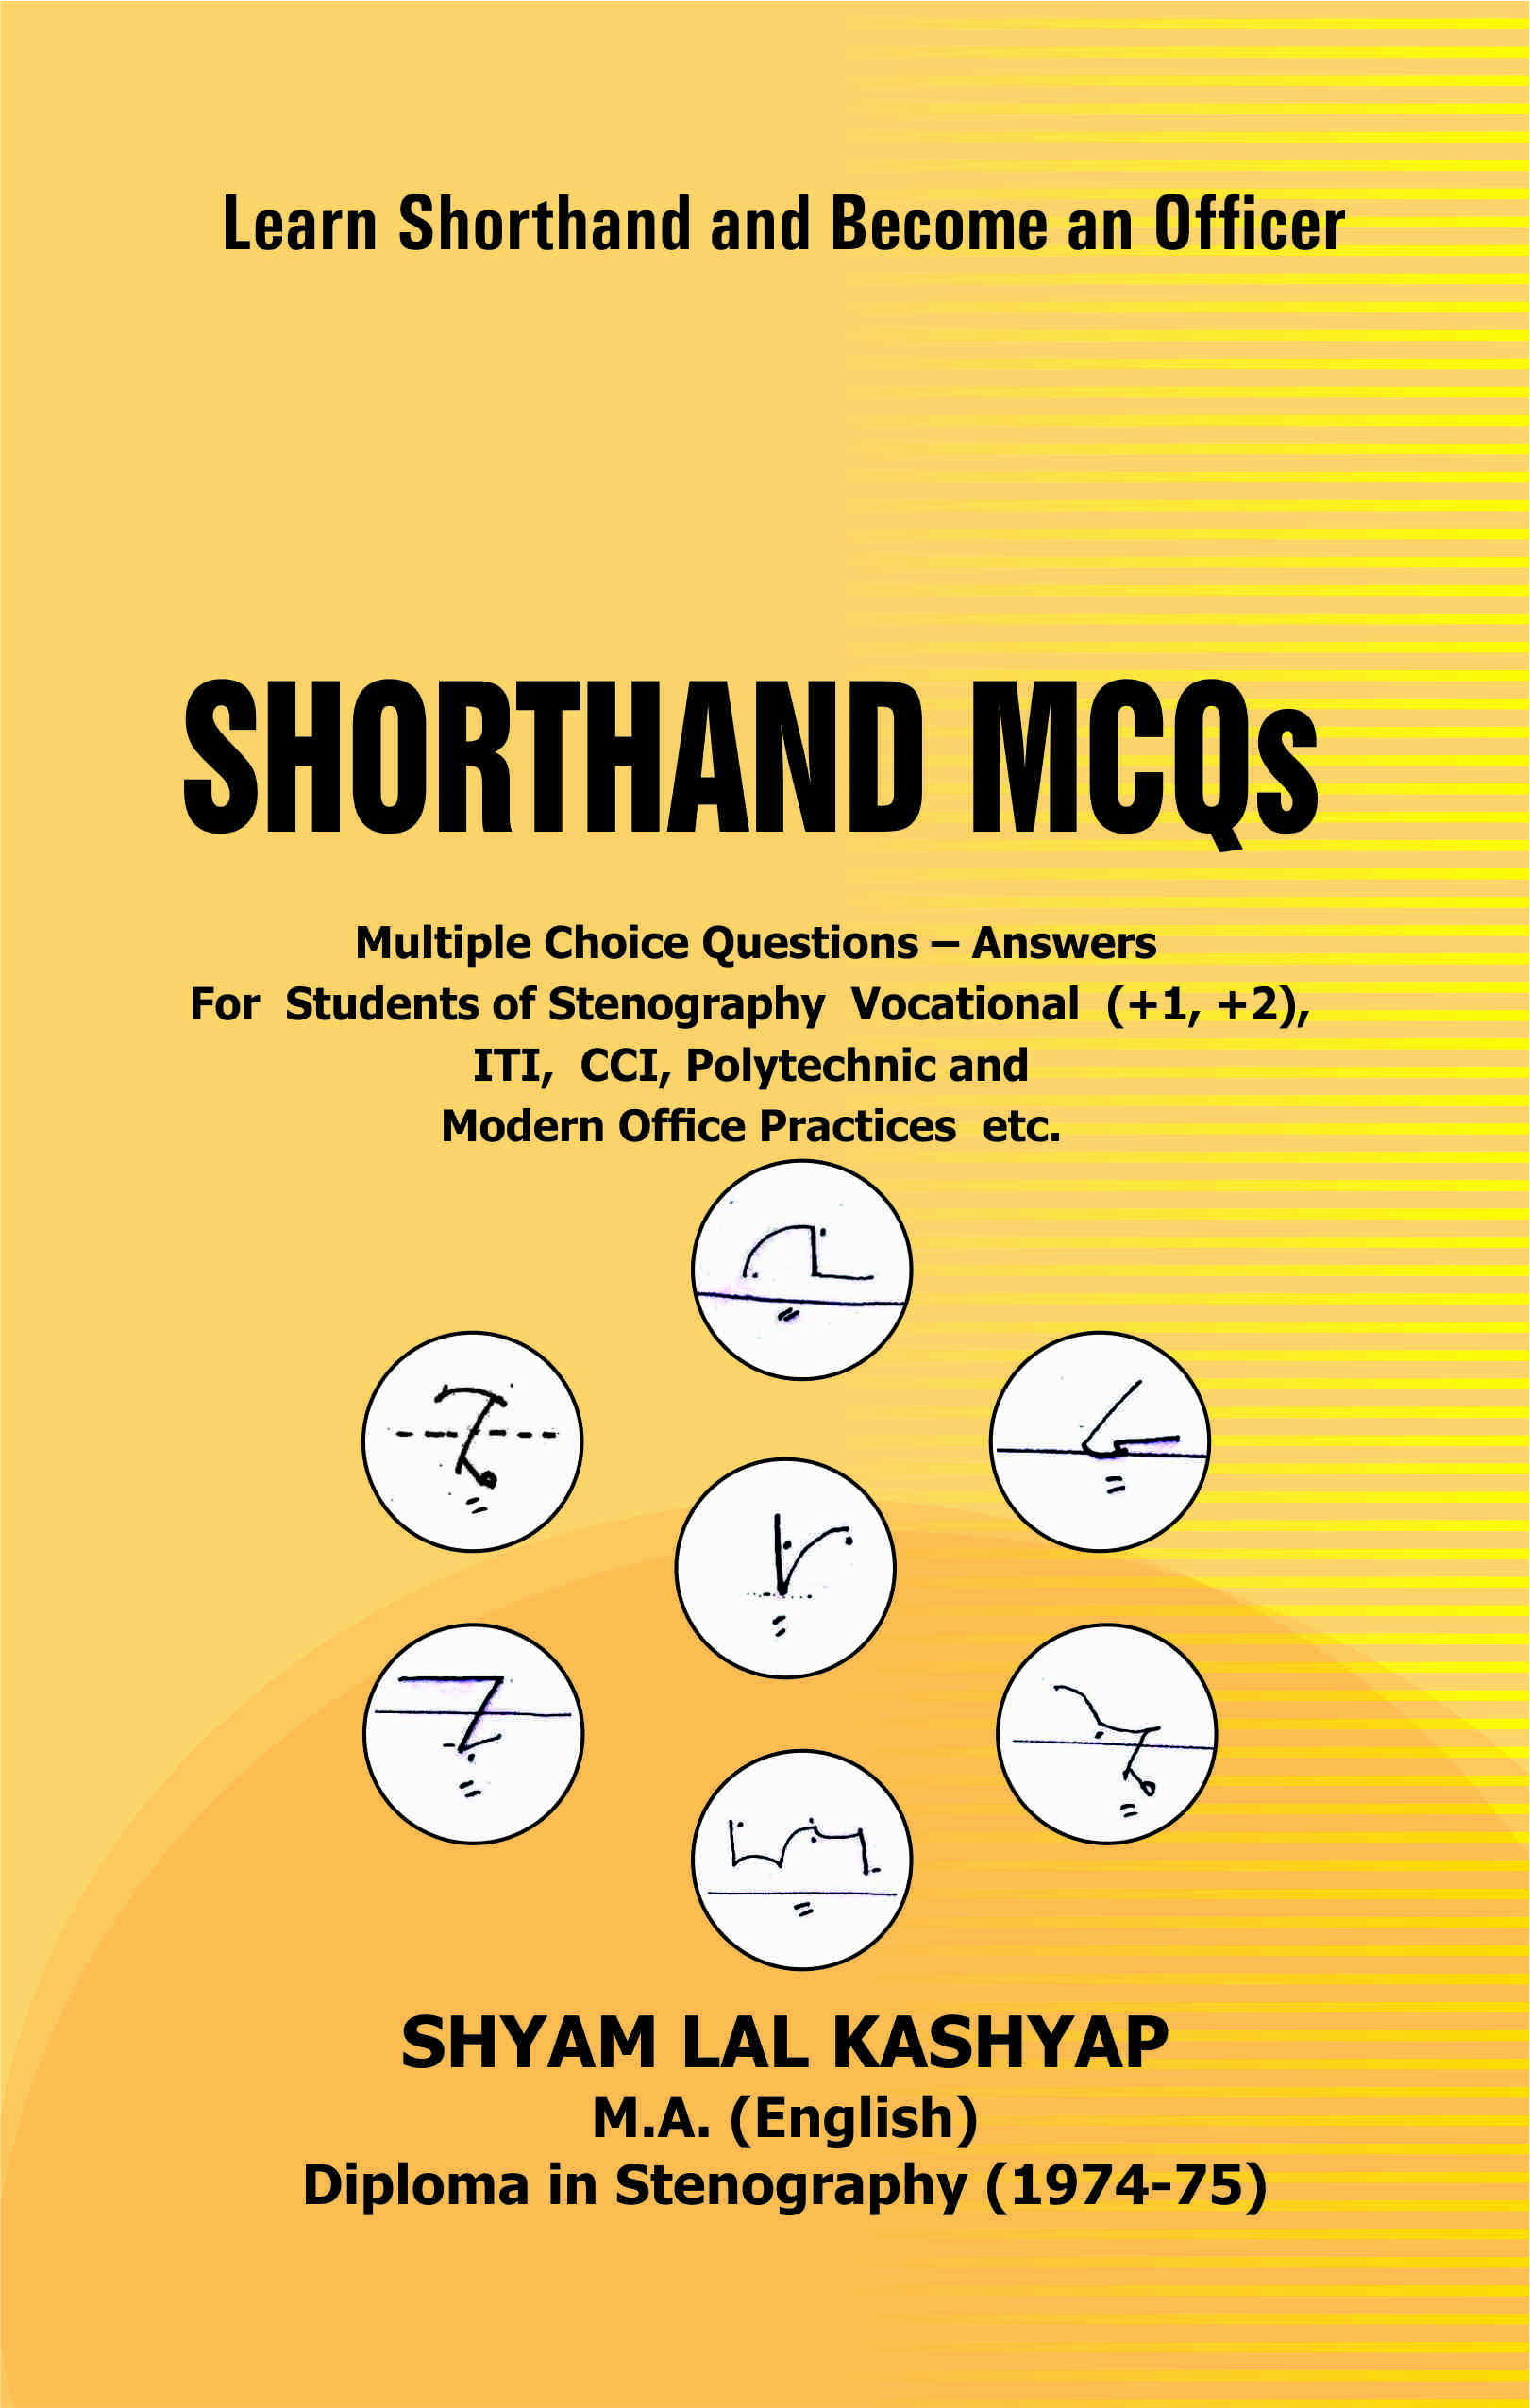 1. Shorthand MCQ Book - First Title Page